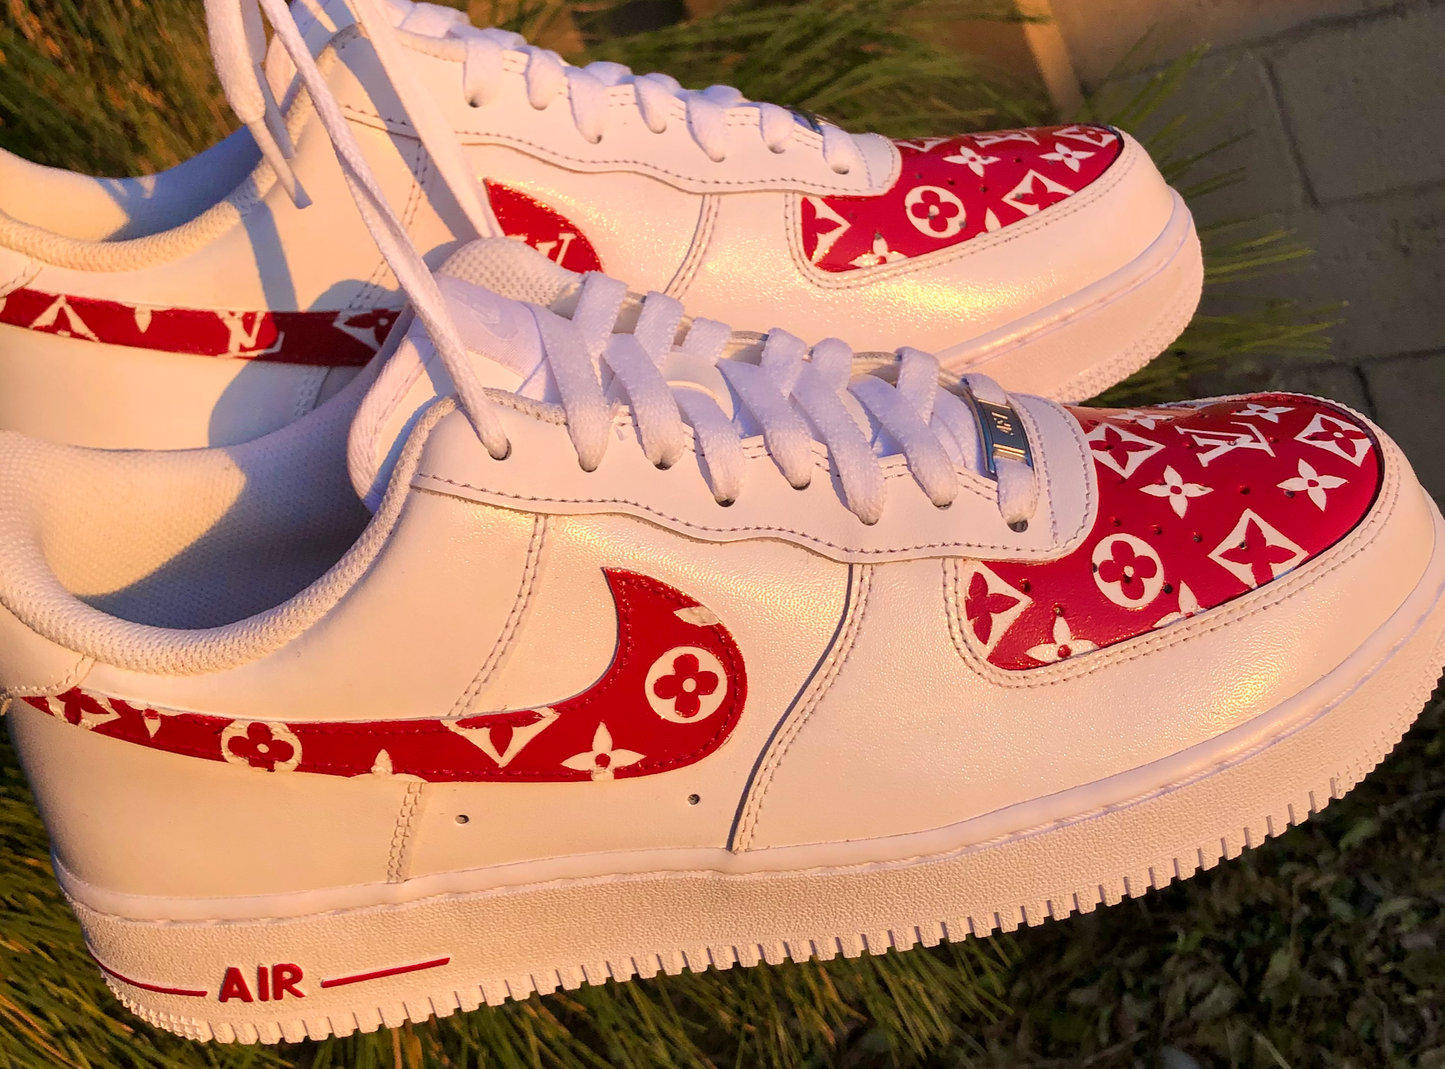 Cherry Blossom Custom Air Force 1 Sneakers 9.5 M / 11 W / Pink + White